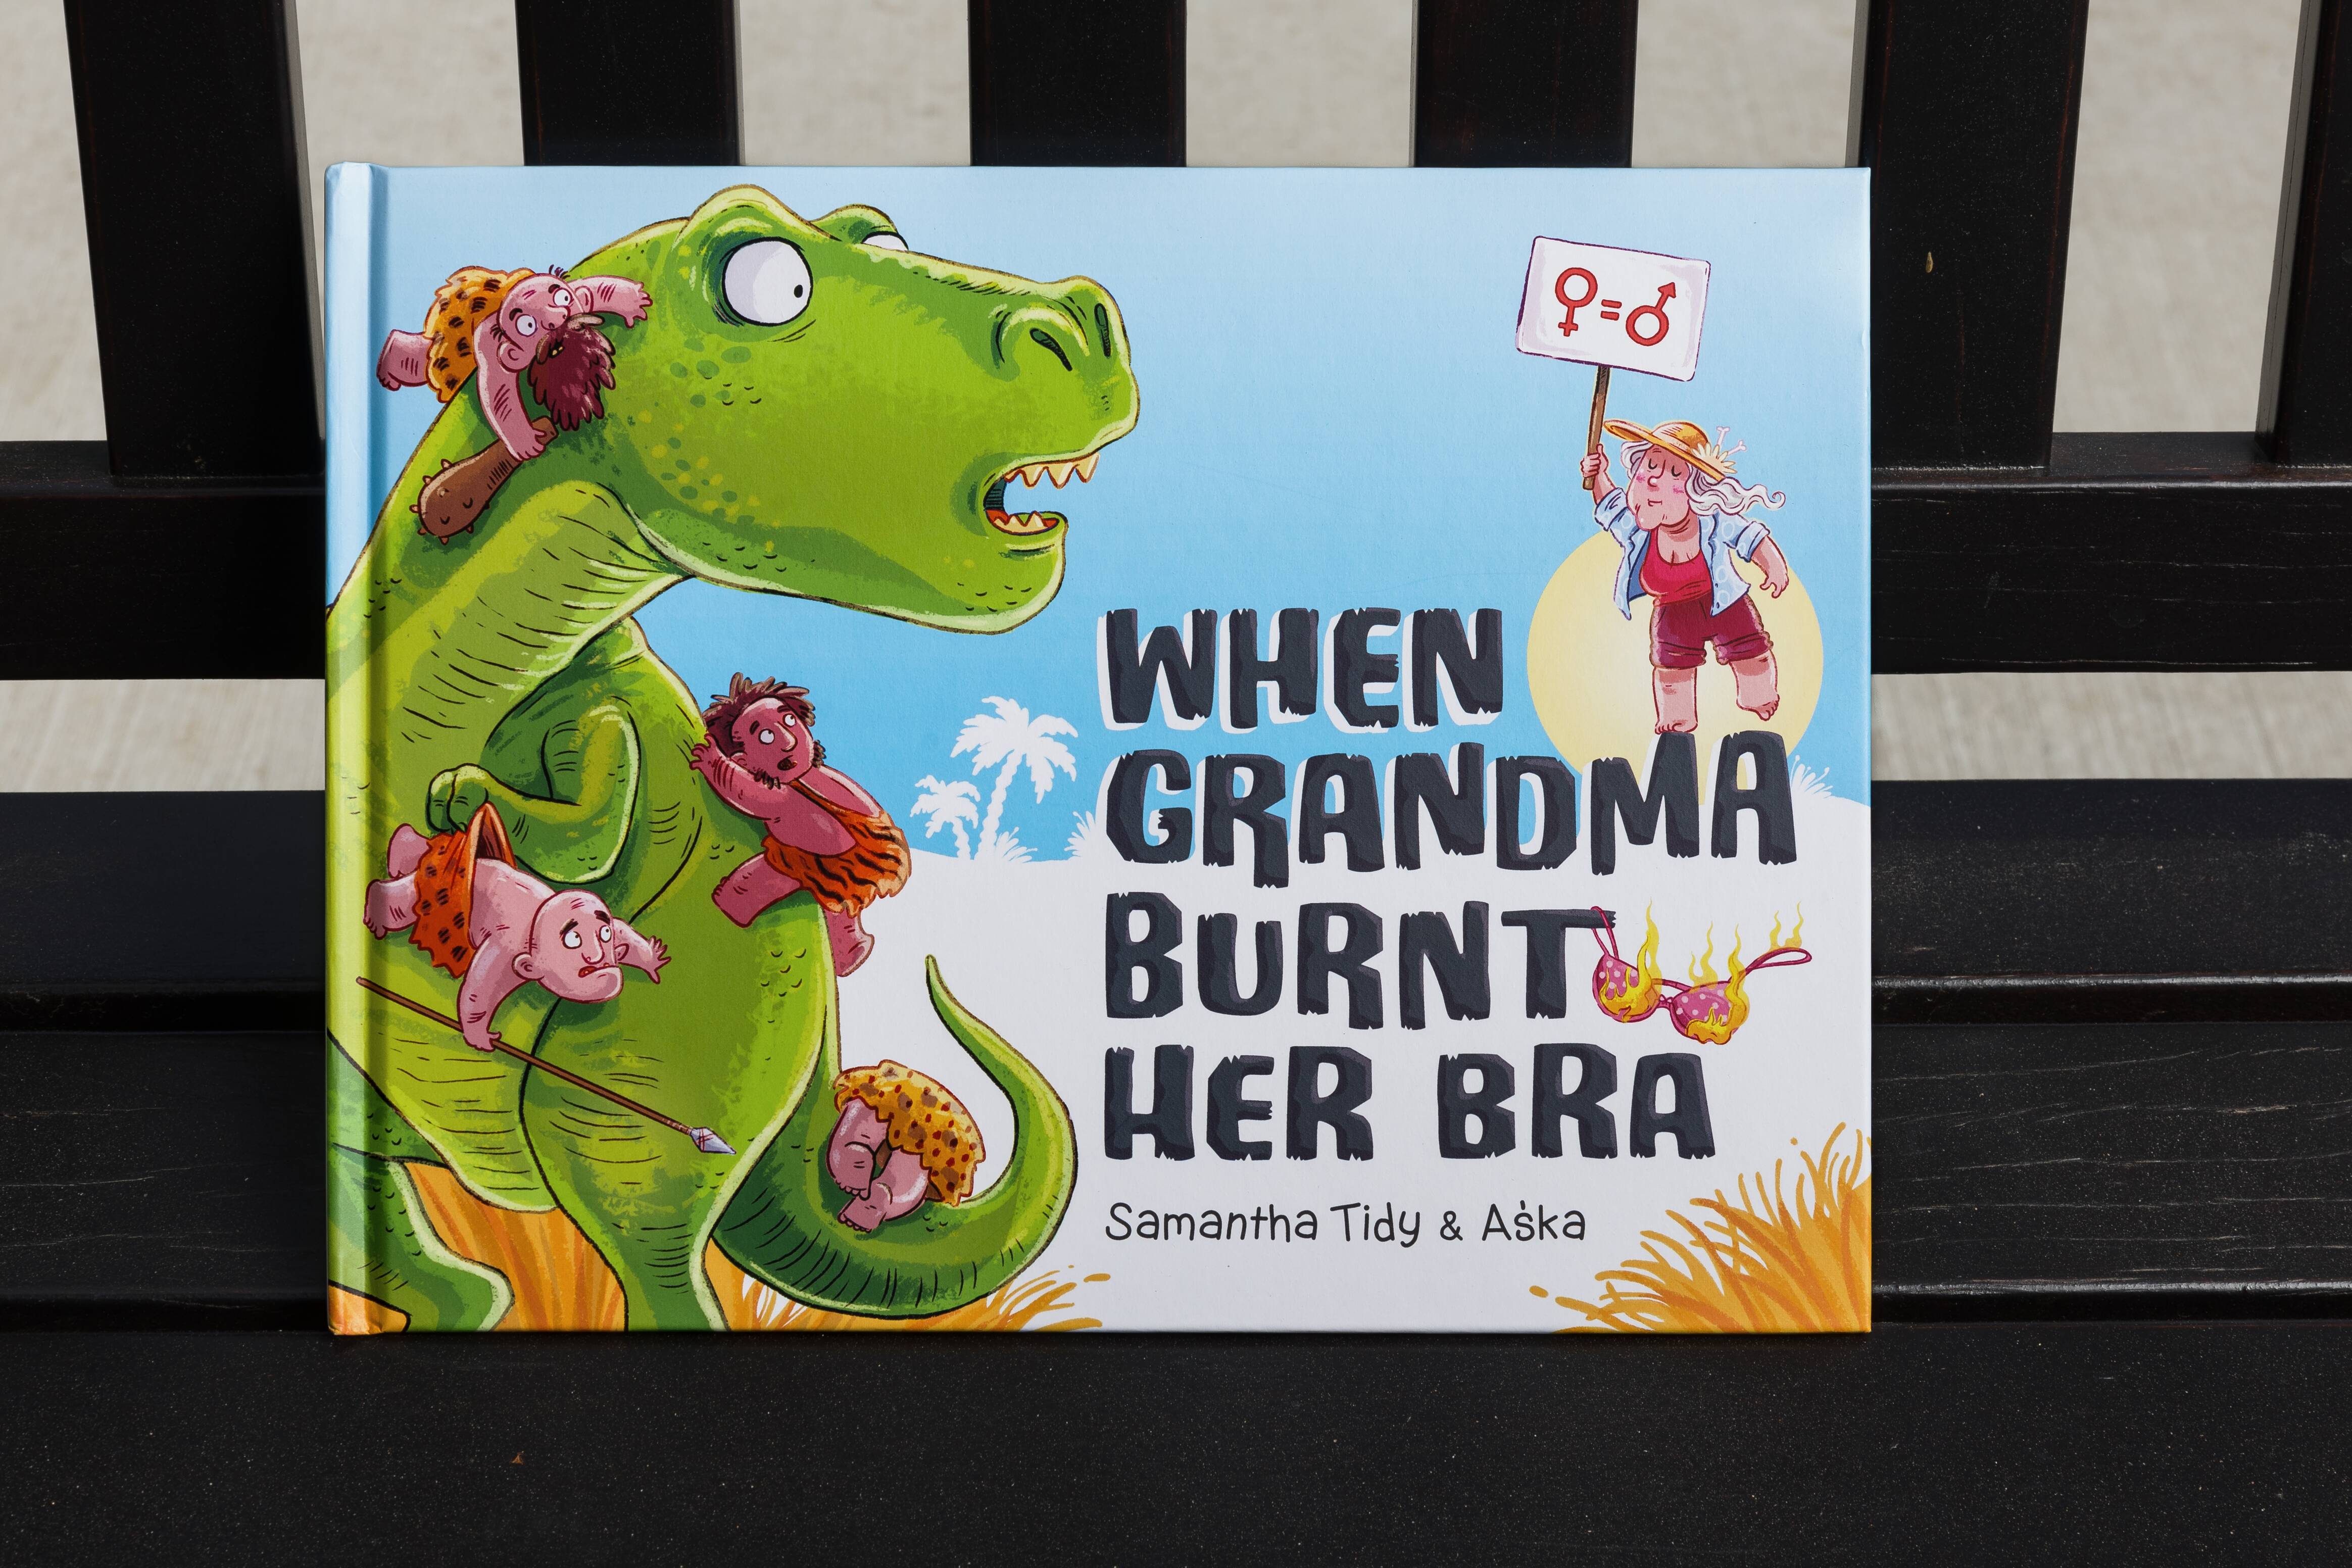 When Grandma Burnt Her Bra, by Samantha Tidy, sees feminism and